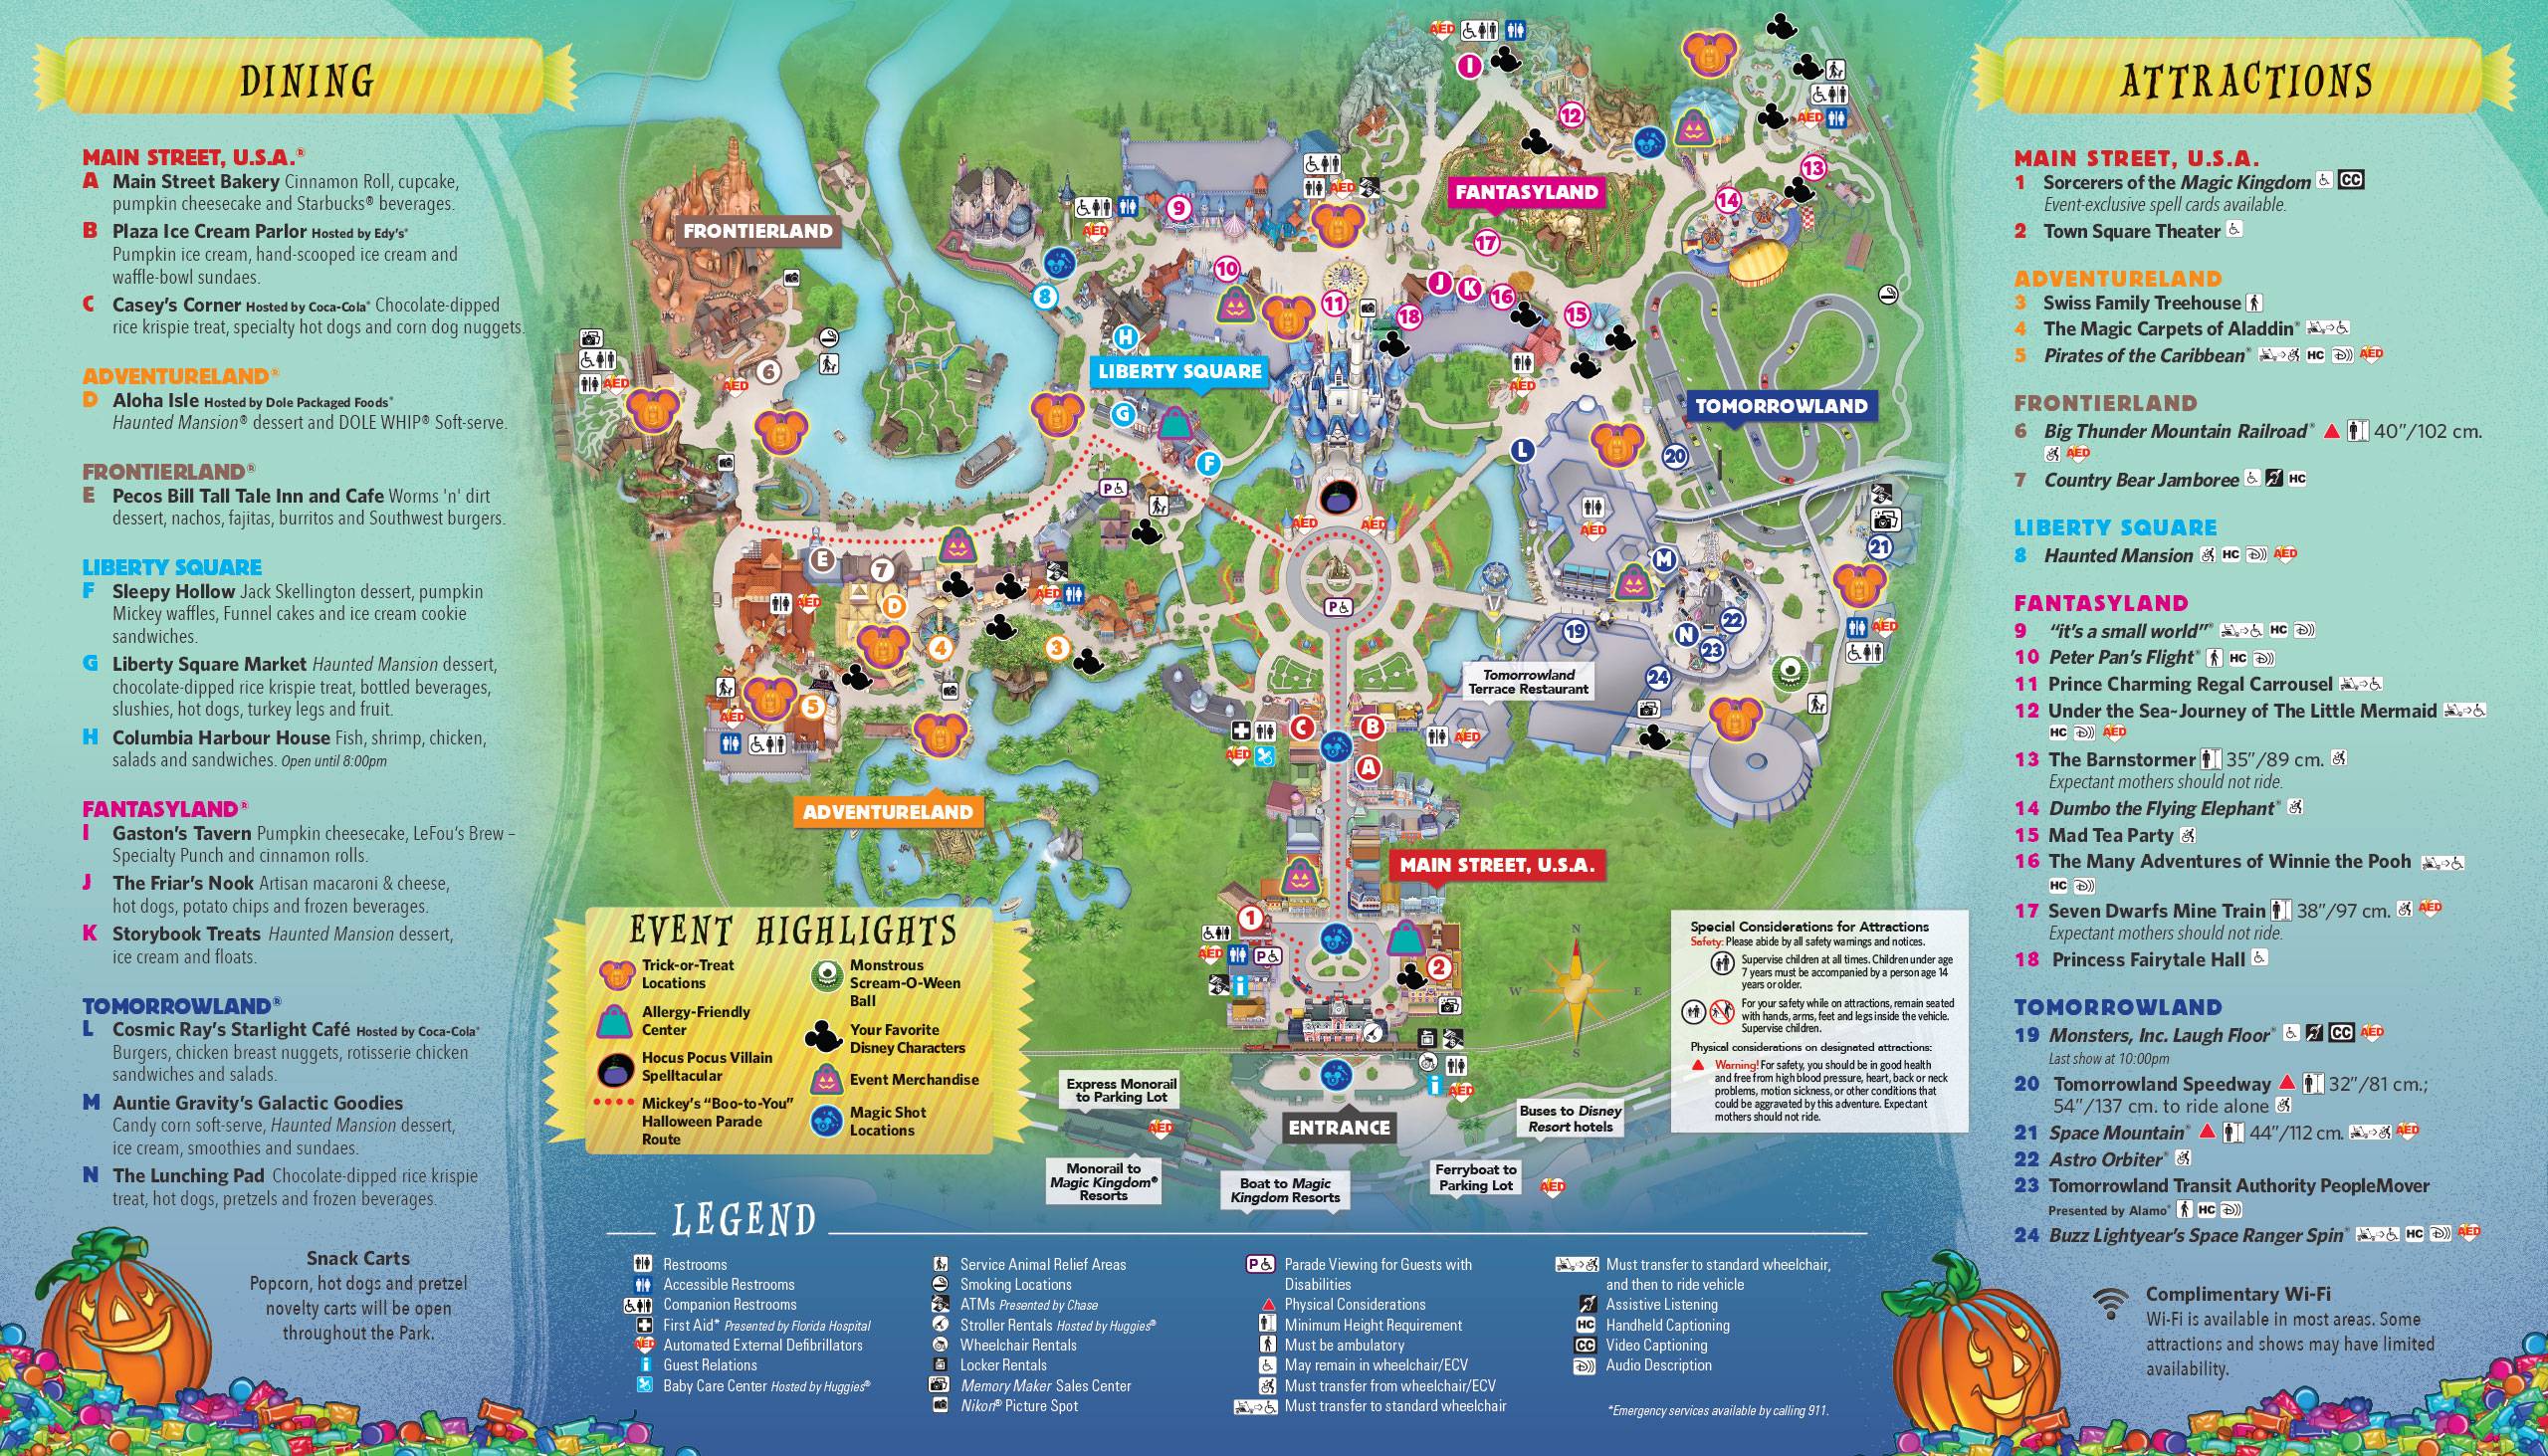 Mickey's Not-So-Scary Halloween Party 2017 guide map - back